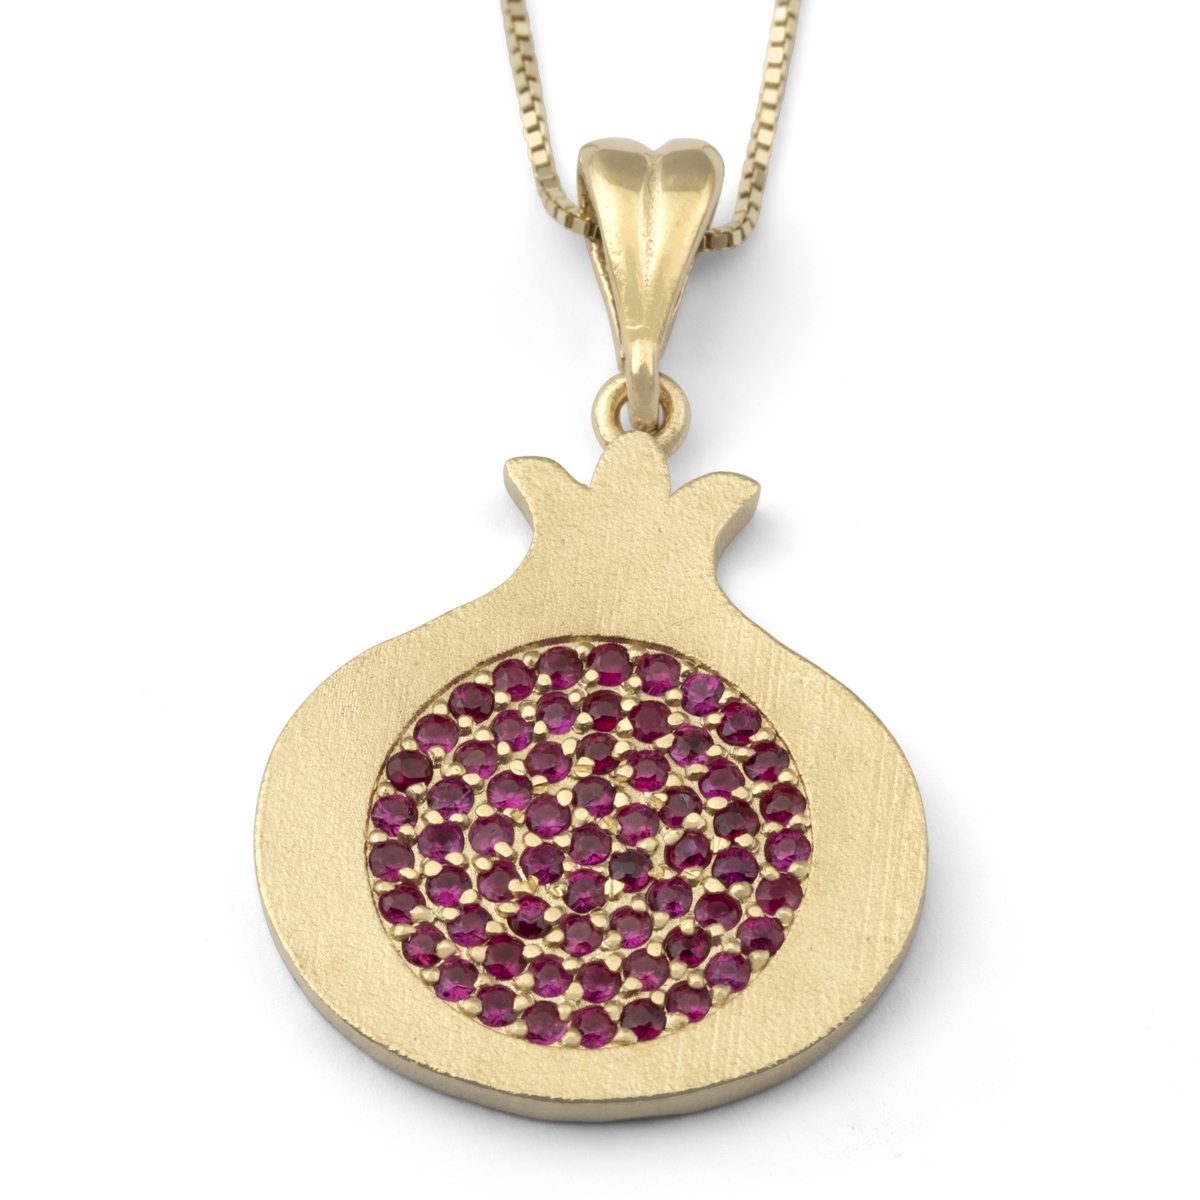 Polished 14K Yellow Gold Pomegranate Pendant Necklace With Ruby Stones - 1